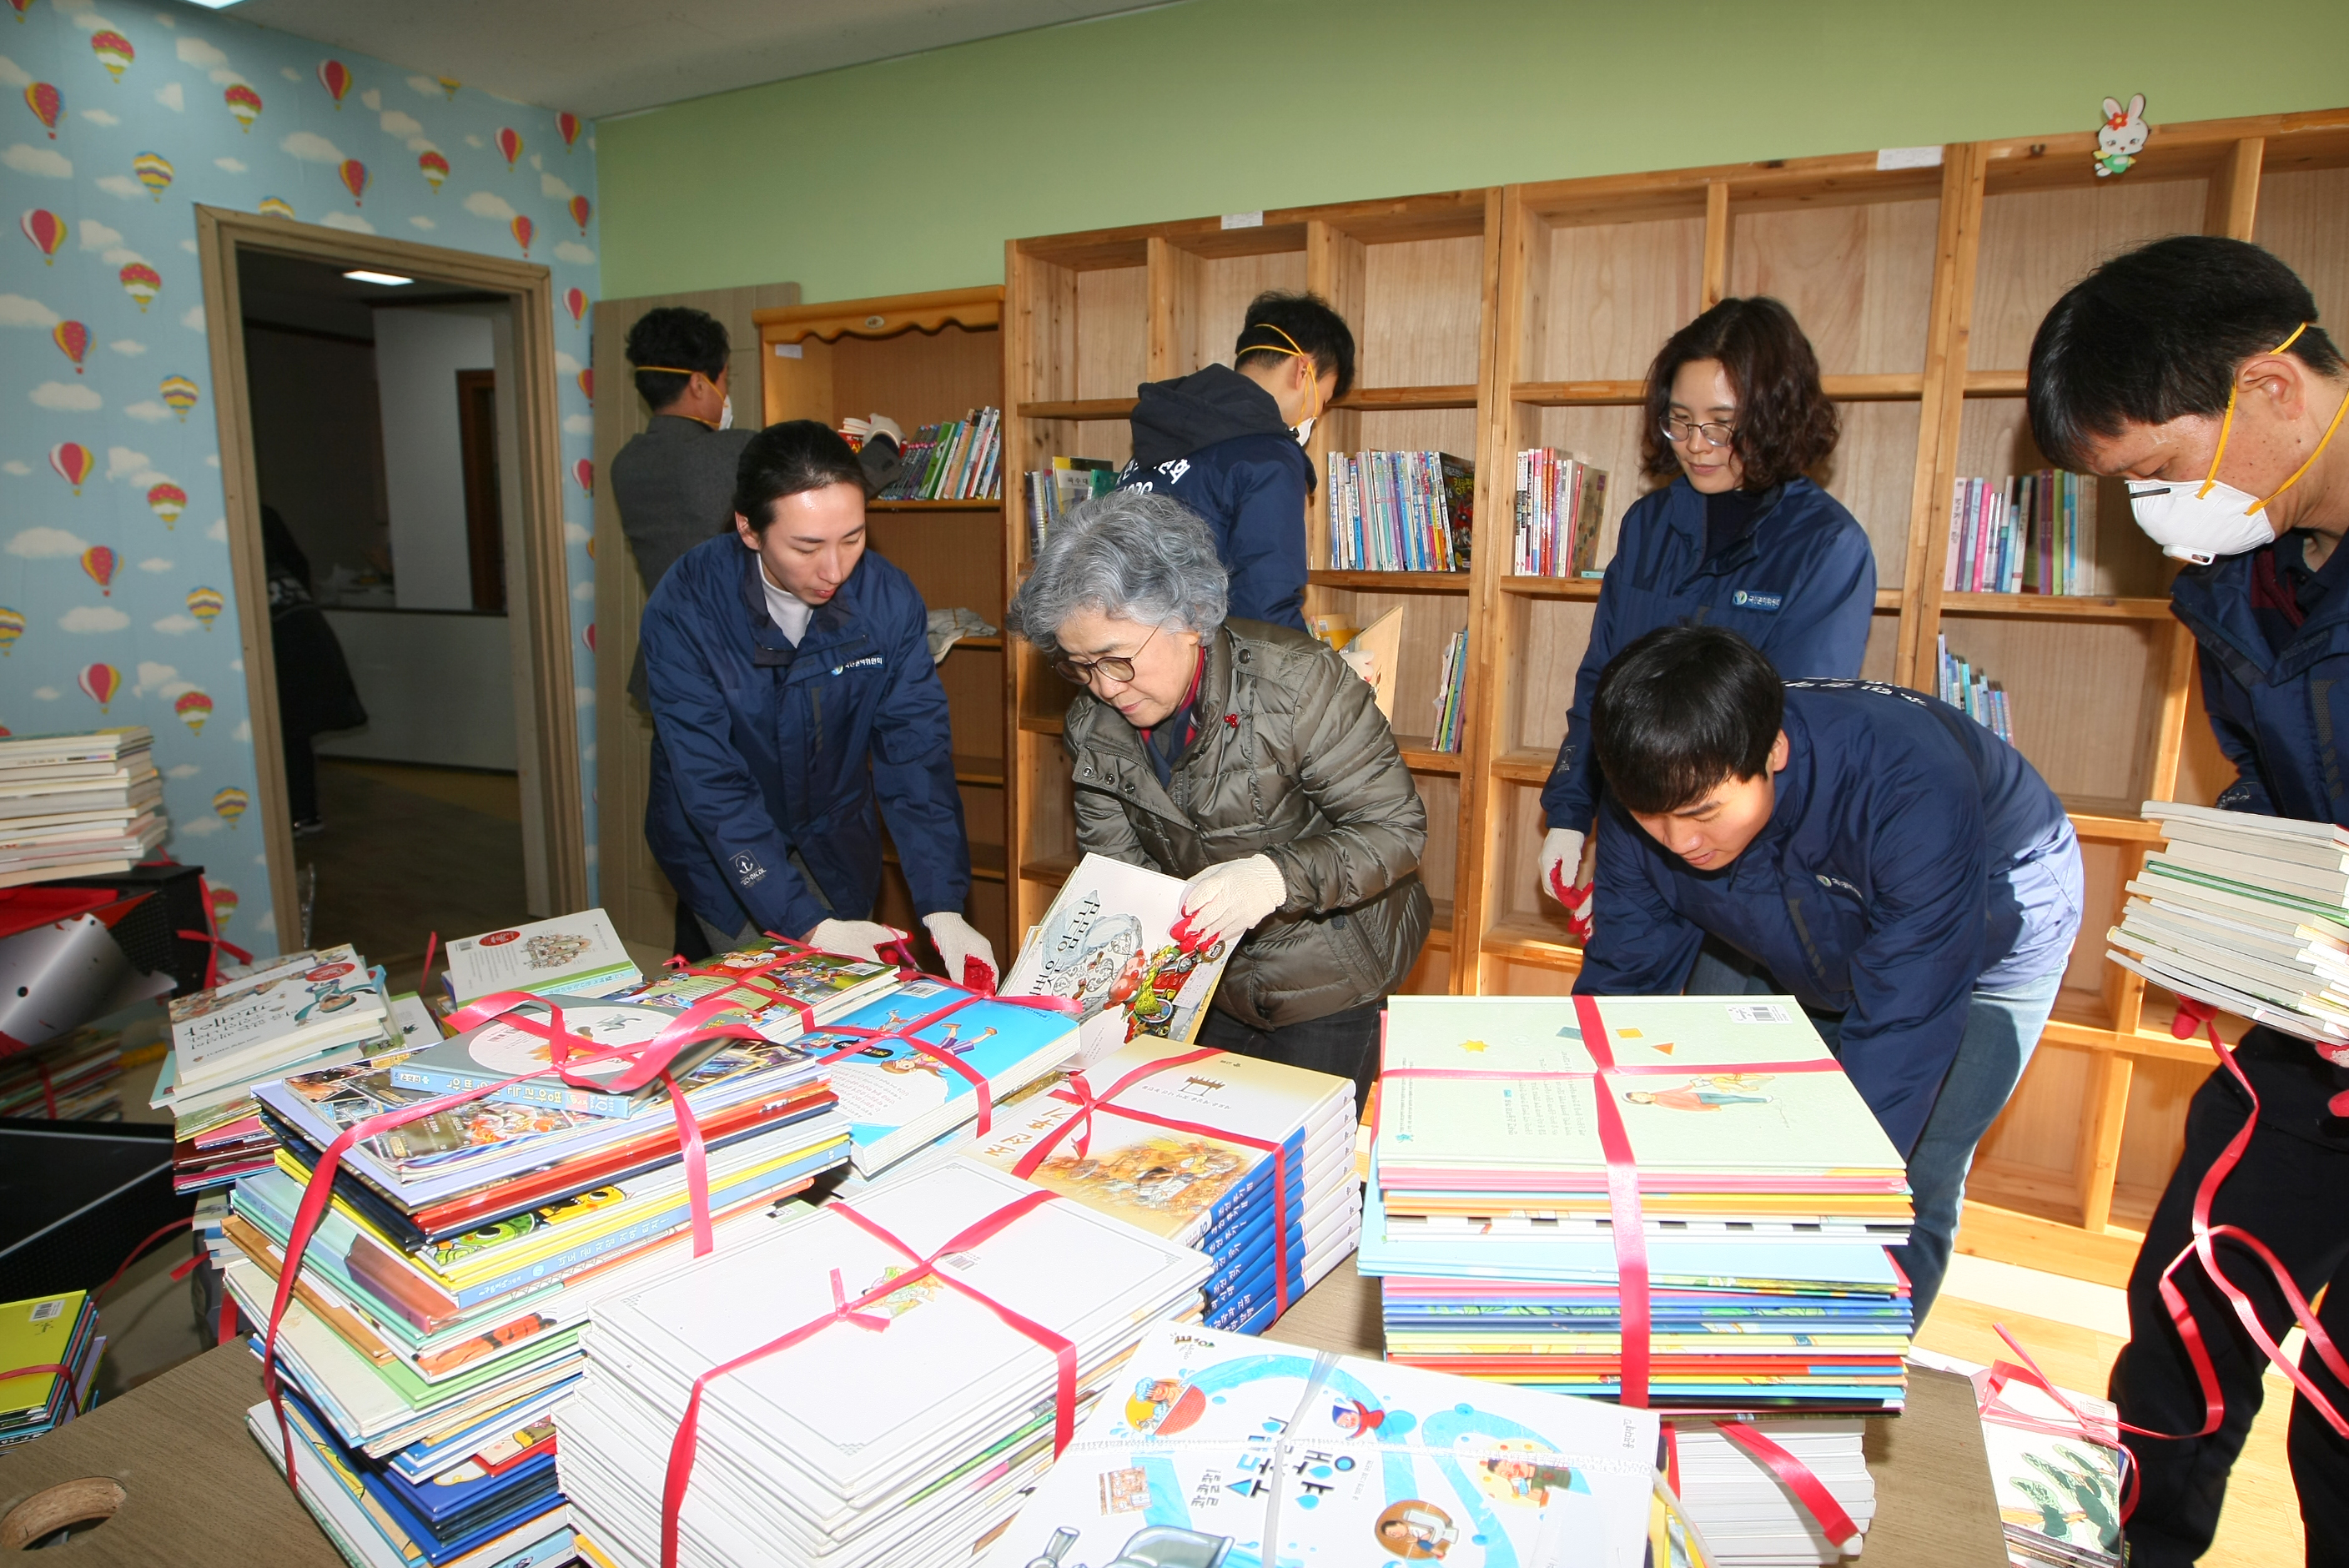 Chairperson Pak Un Jong and ACRC employees visited a local orphanage and gave helping hands to move the facility